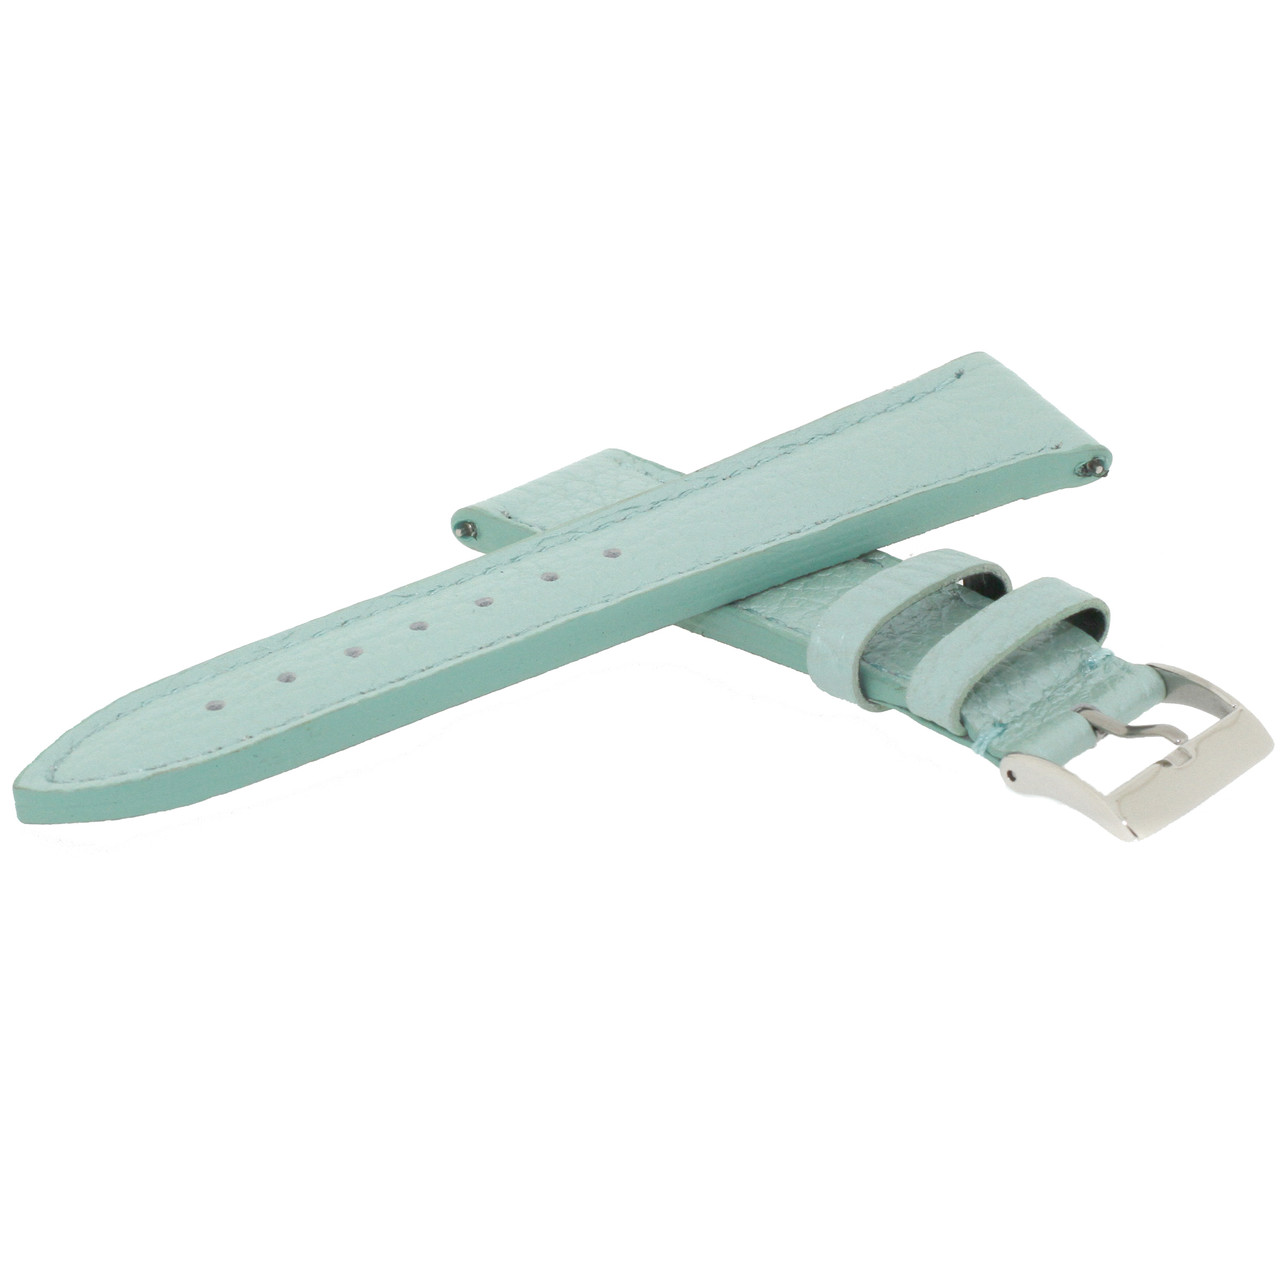 Watch Band Turquoise Blue Metallic Leather Watch Band Quick Release Springs 12mm-20mm